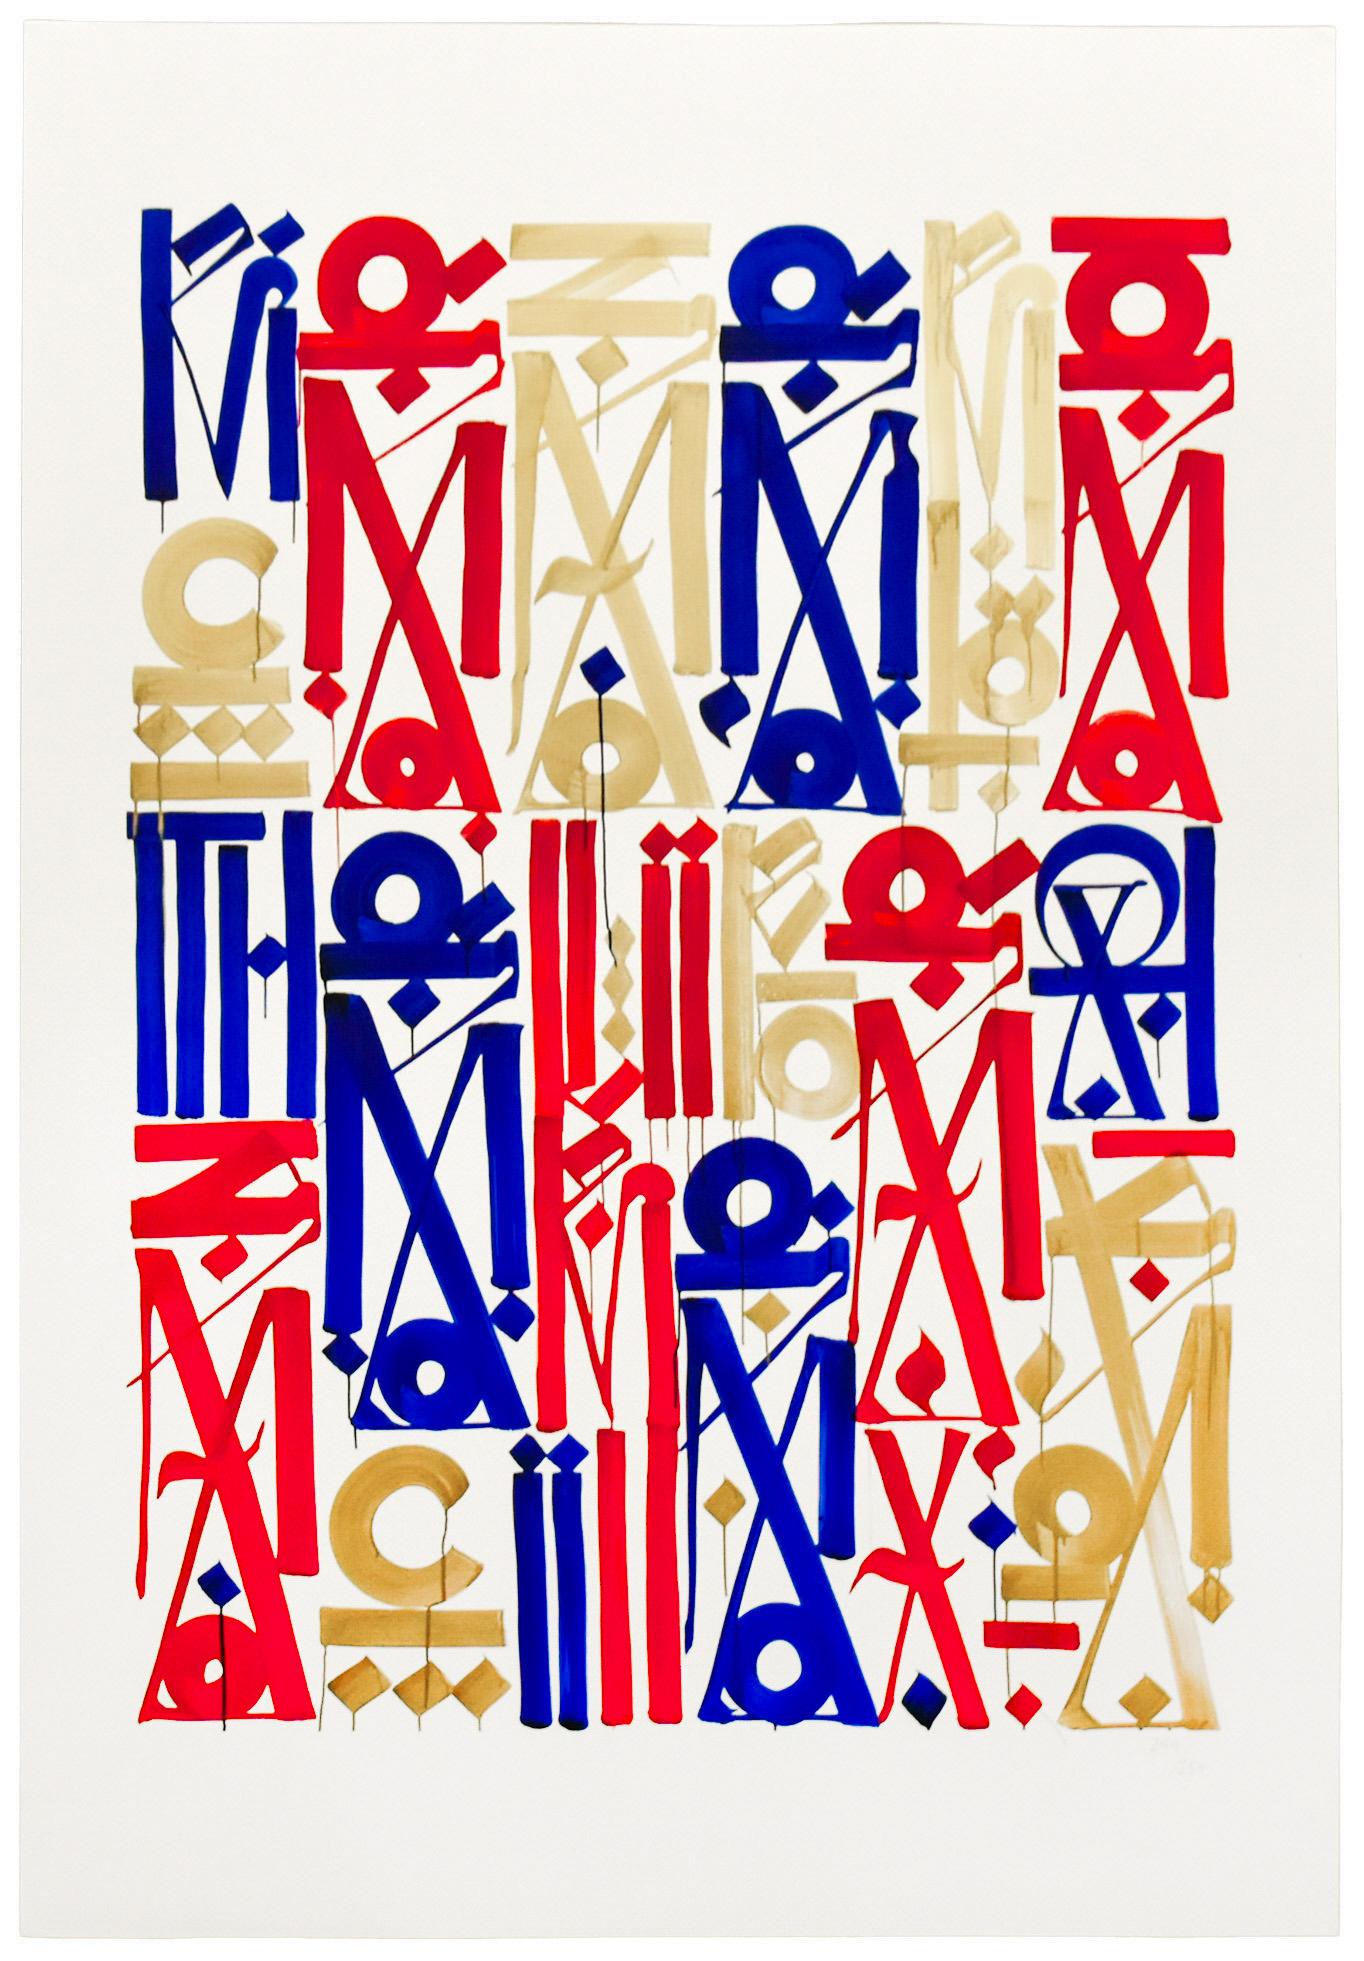 Gorgeous Retna Braddock Tiles Print created in his distinctive style combining calligraphy, hieroglyphics and graffiti.
Limited edition of 250.
Released in 2013.
Hand numbered in pencil on bottom right of print.
Has  Braddock Tiles stamp lightly on